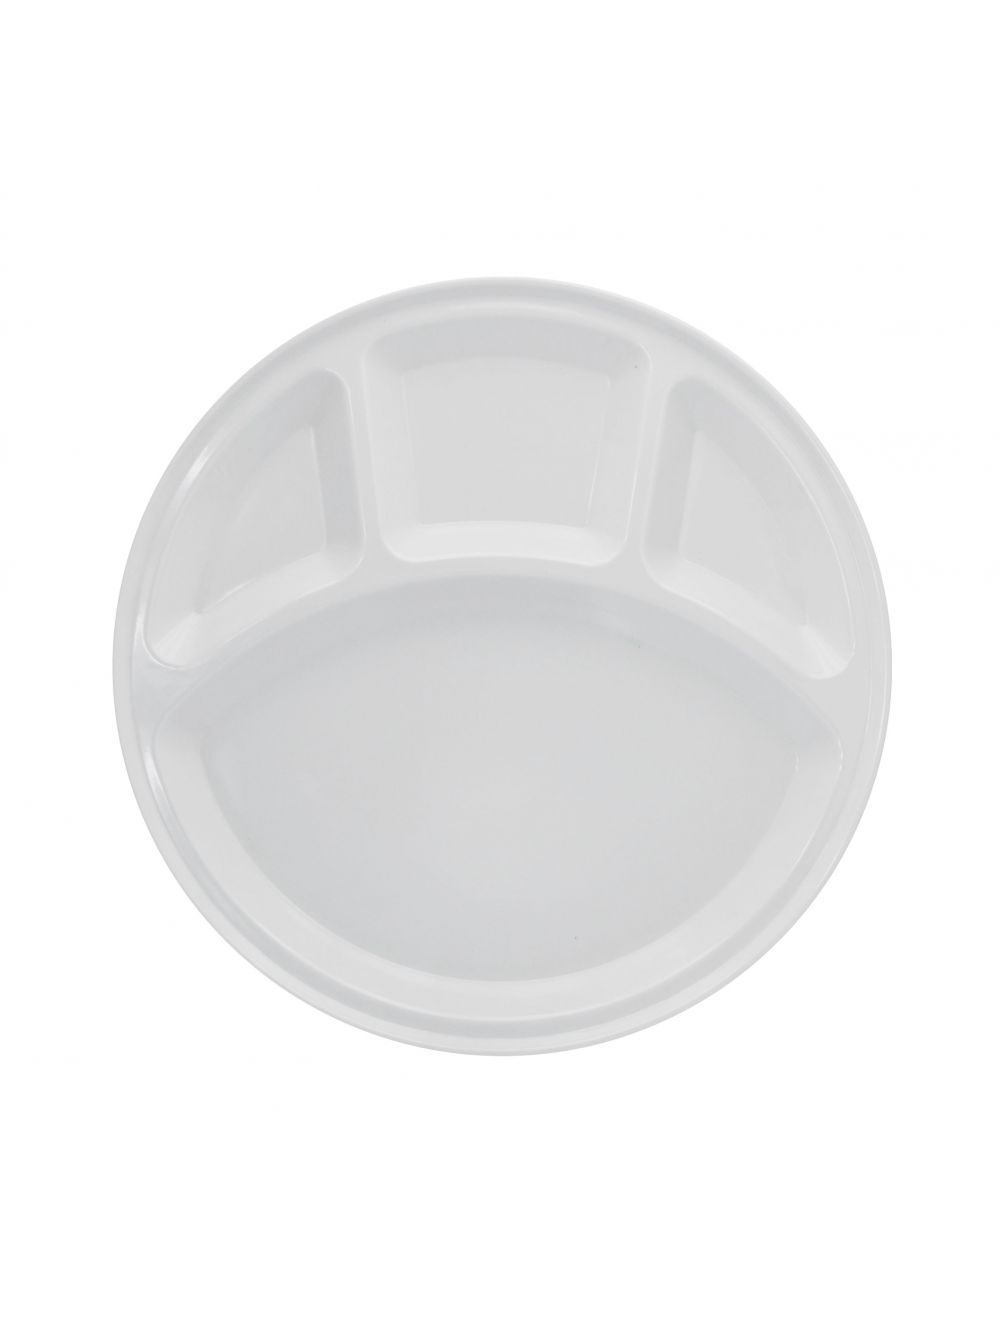 Dinewell Melamine 4 Partition Tray White-DWHP3141W